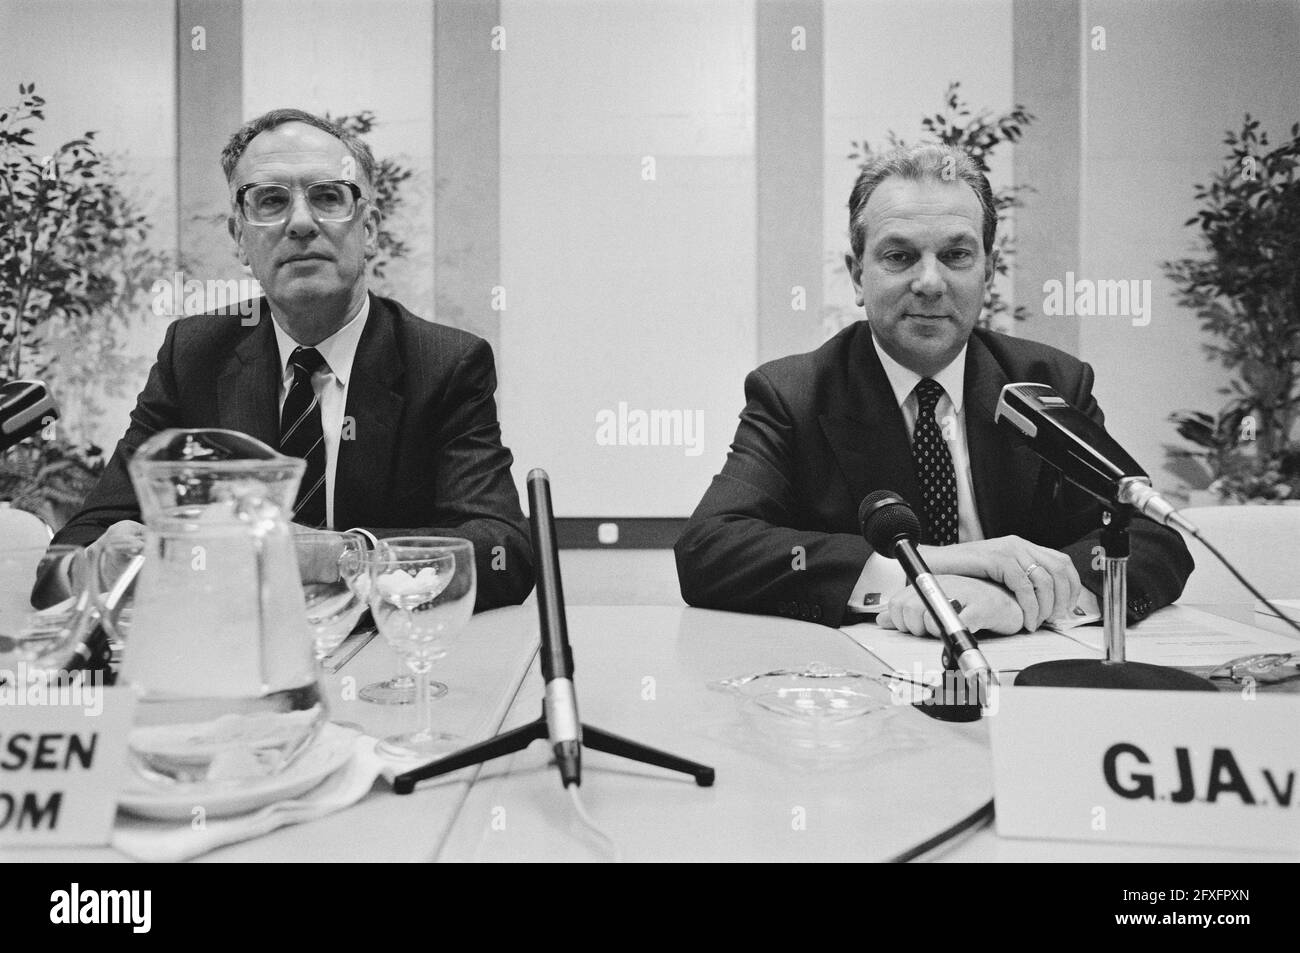 W.E. Scherpenhuijsen Rom (NMB) and G.J.A. van der Lugt (r), February 17, 1989, banks, press conferences, The Netherlands, 20th century press agency photo, news to remember, documentary, historic photography 1945-1990, visual stories, human history of the Twentieth Century, capturing moments in time Stock Photo